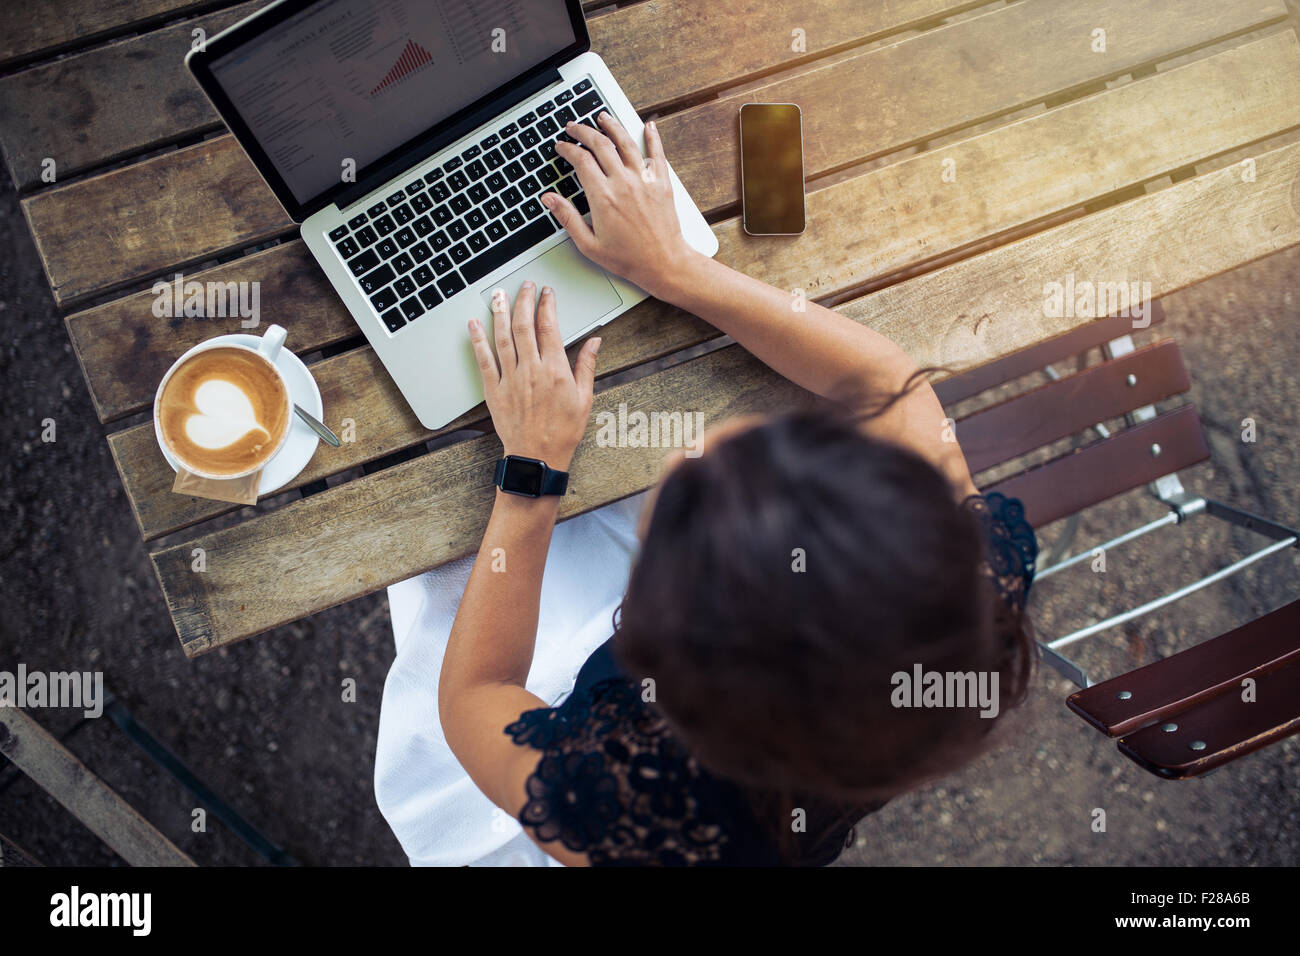 Top view of female using her laptop at a cafe. Overhead shot of young woman sitting at a table with a cup of coffee and mobile p Stock Photo